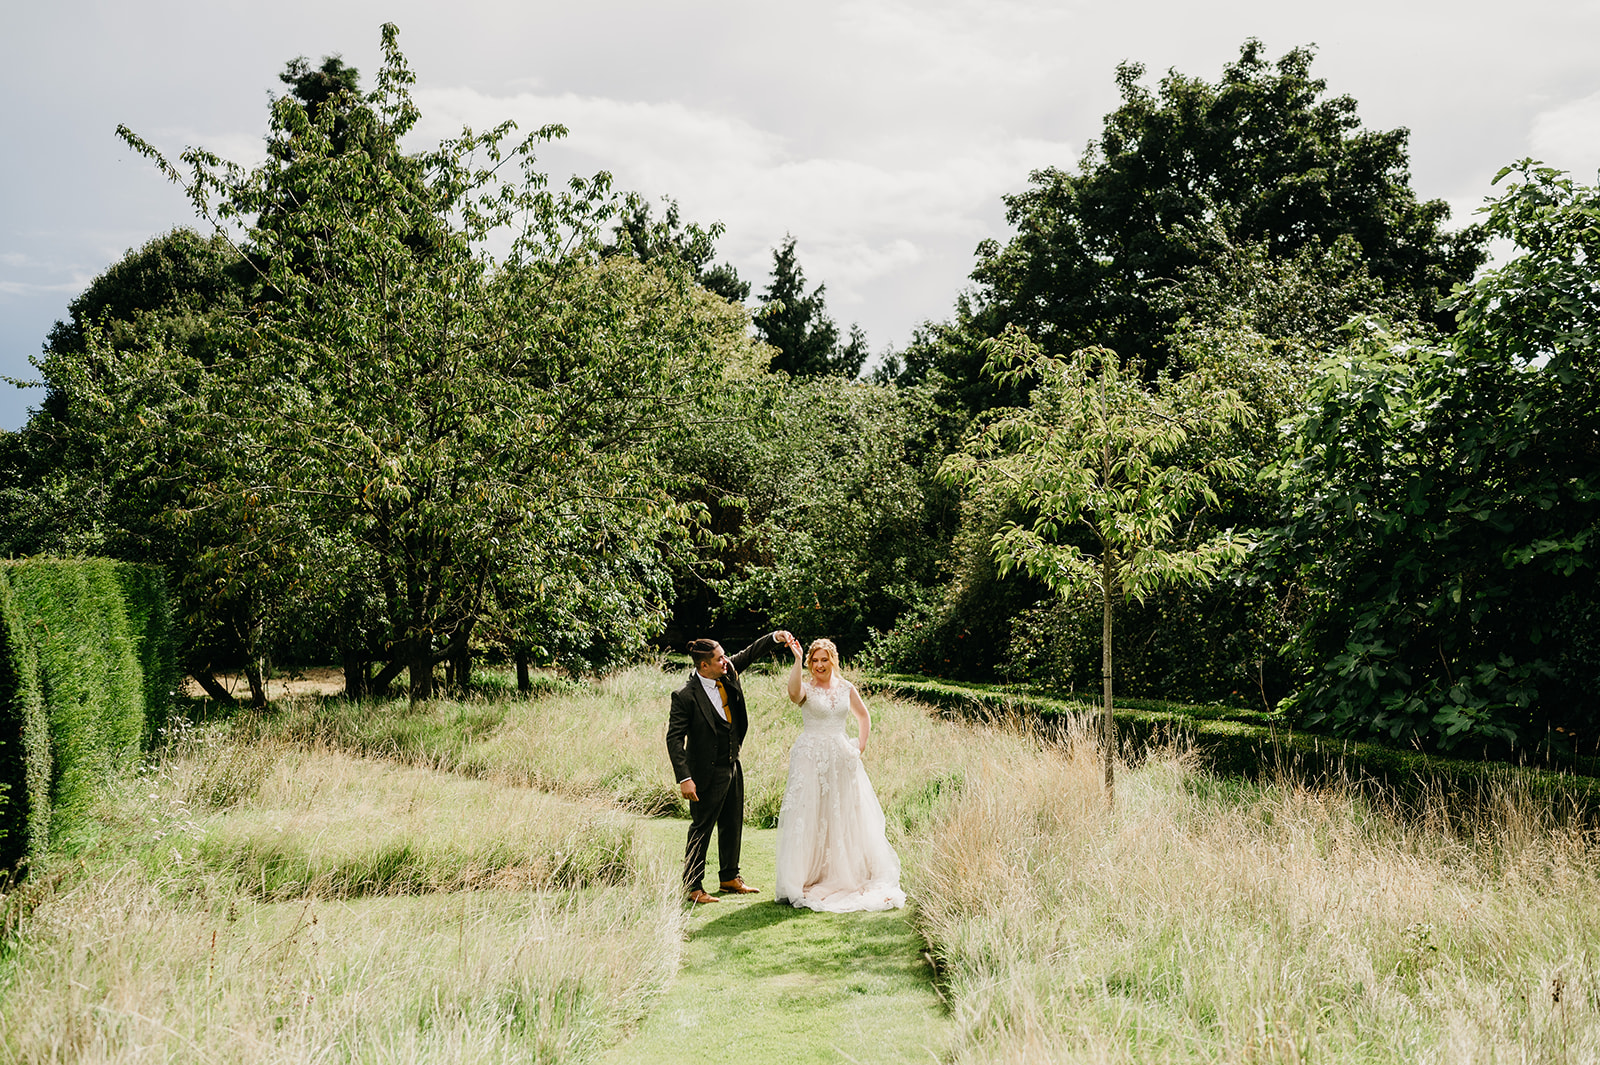 shropshire couple dance in the gardens of pimhill barn 